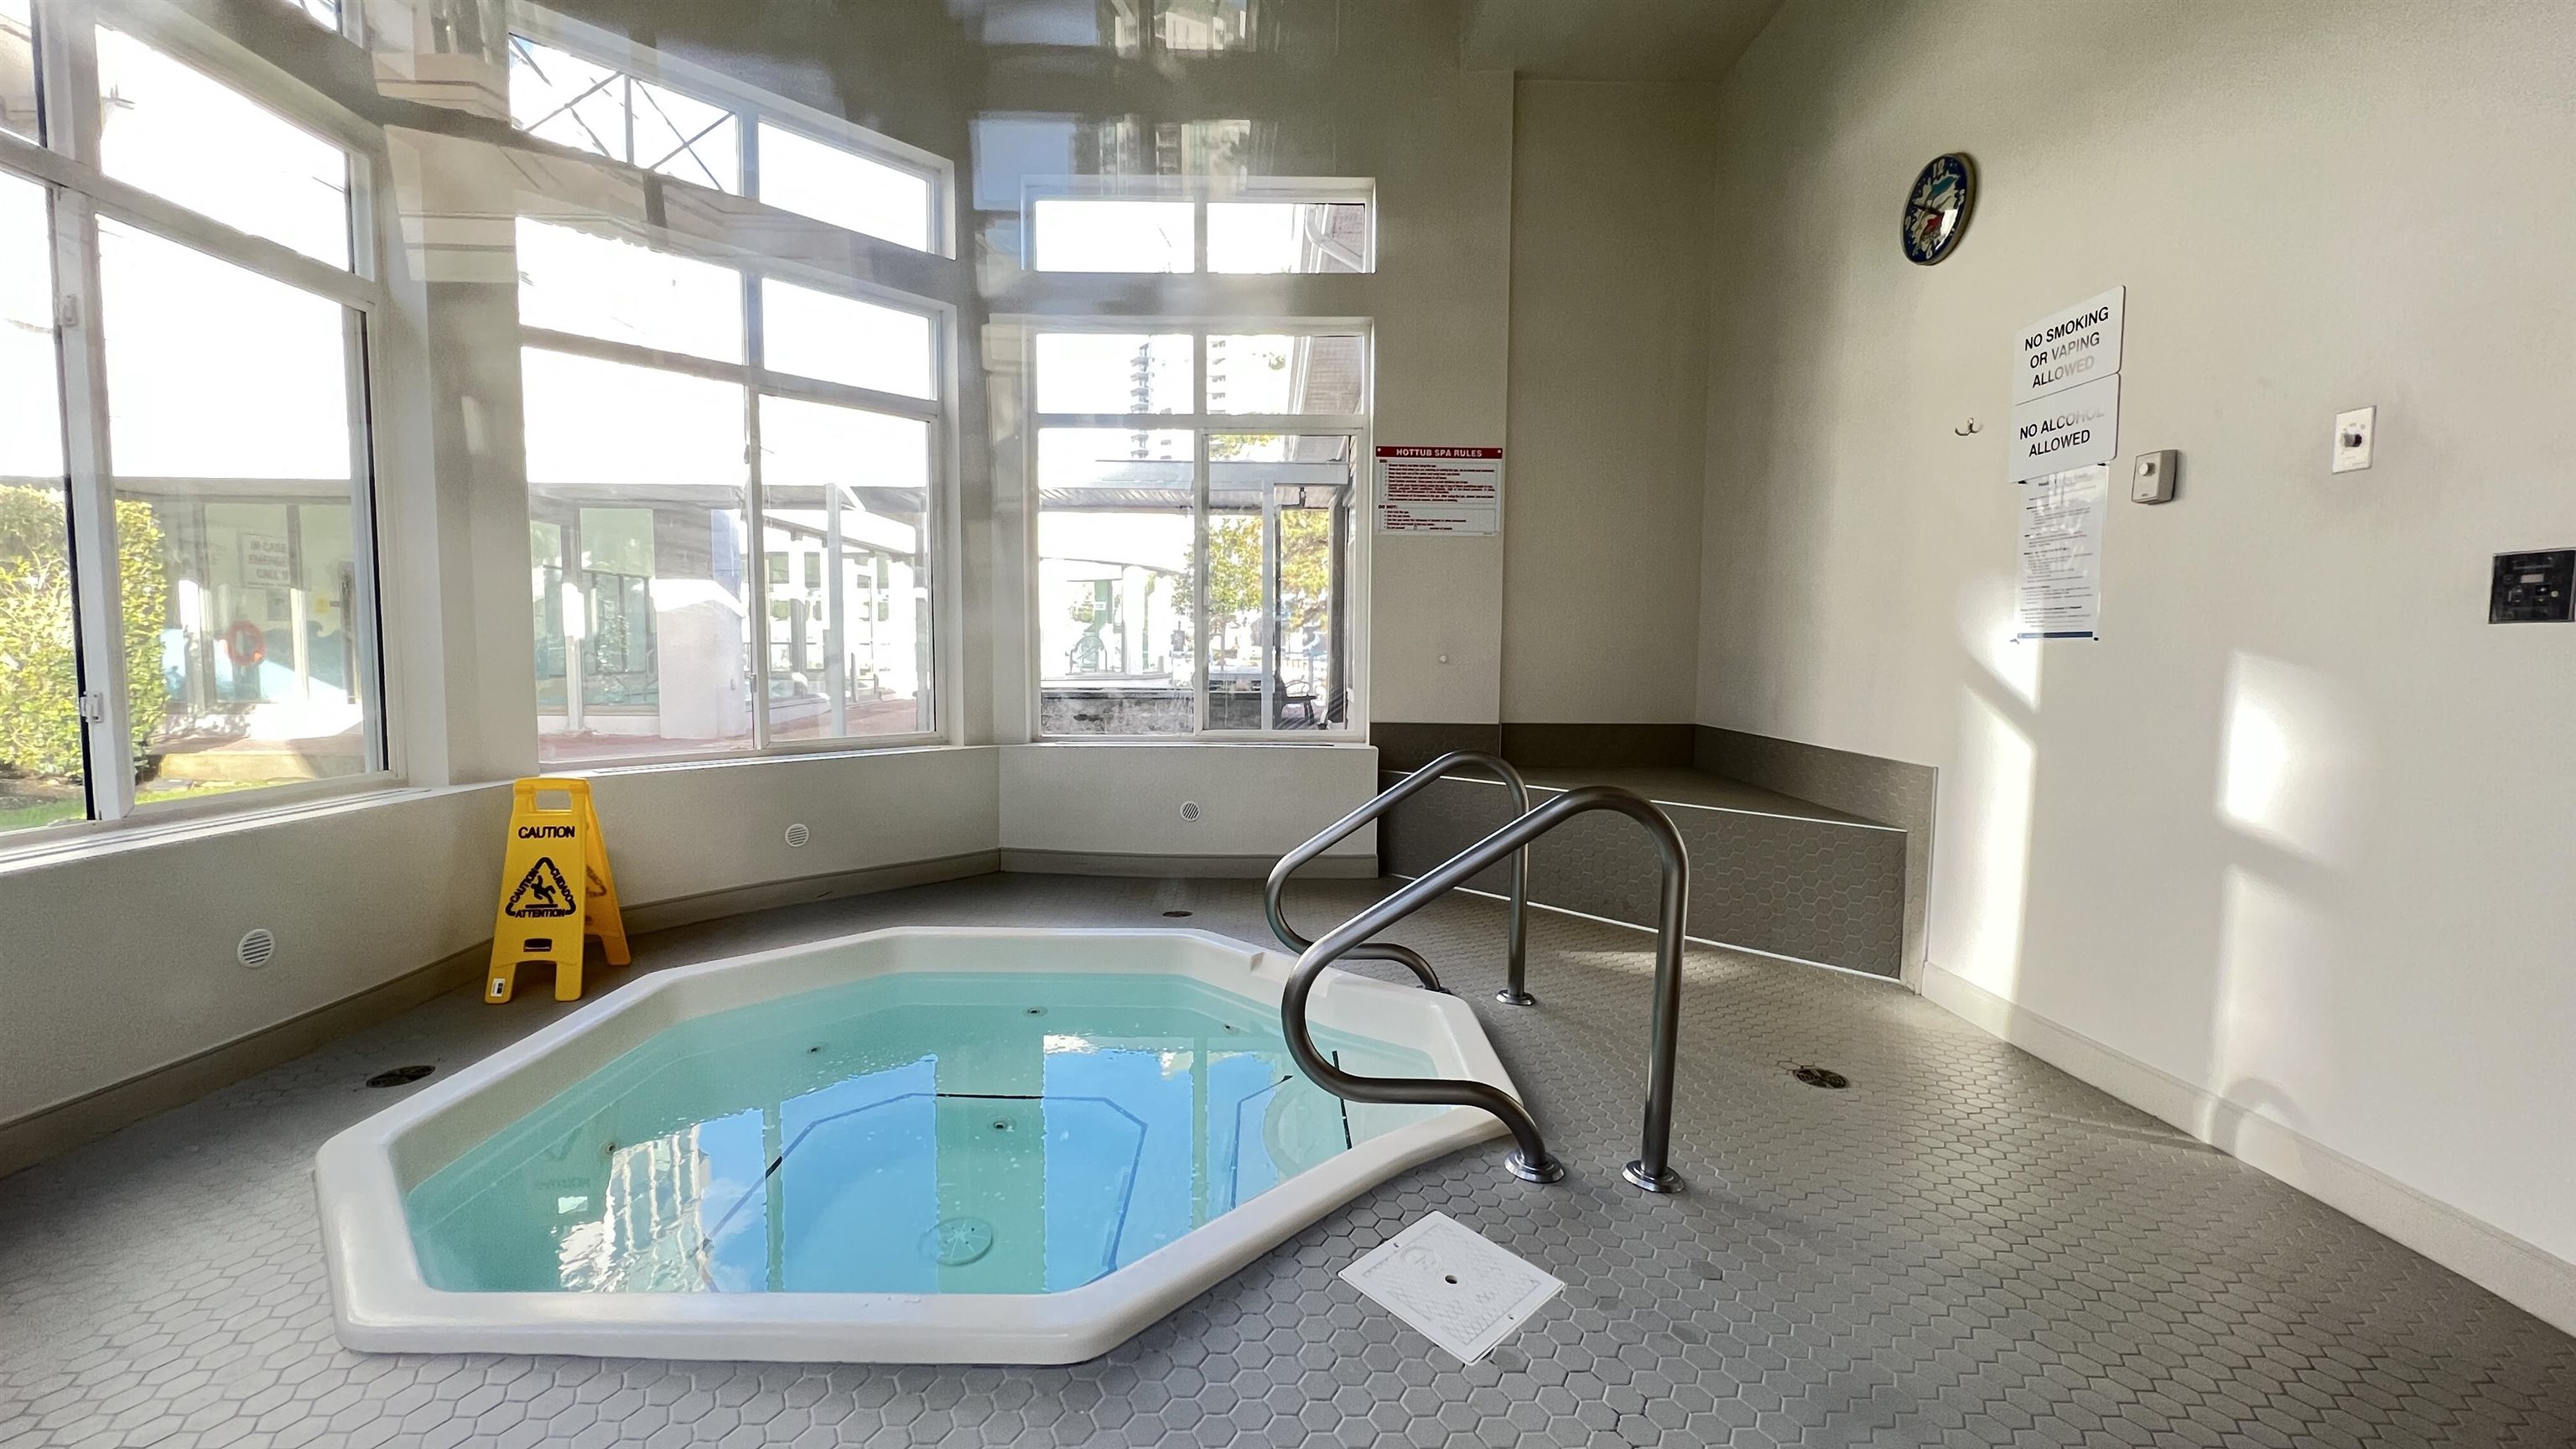 Hot tub and Sauna located at the Fitness facilities